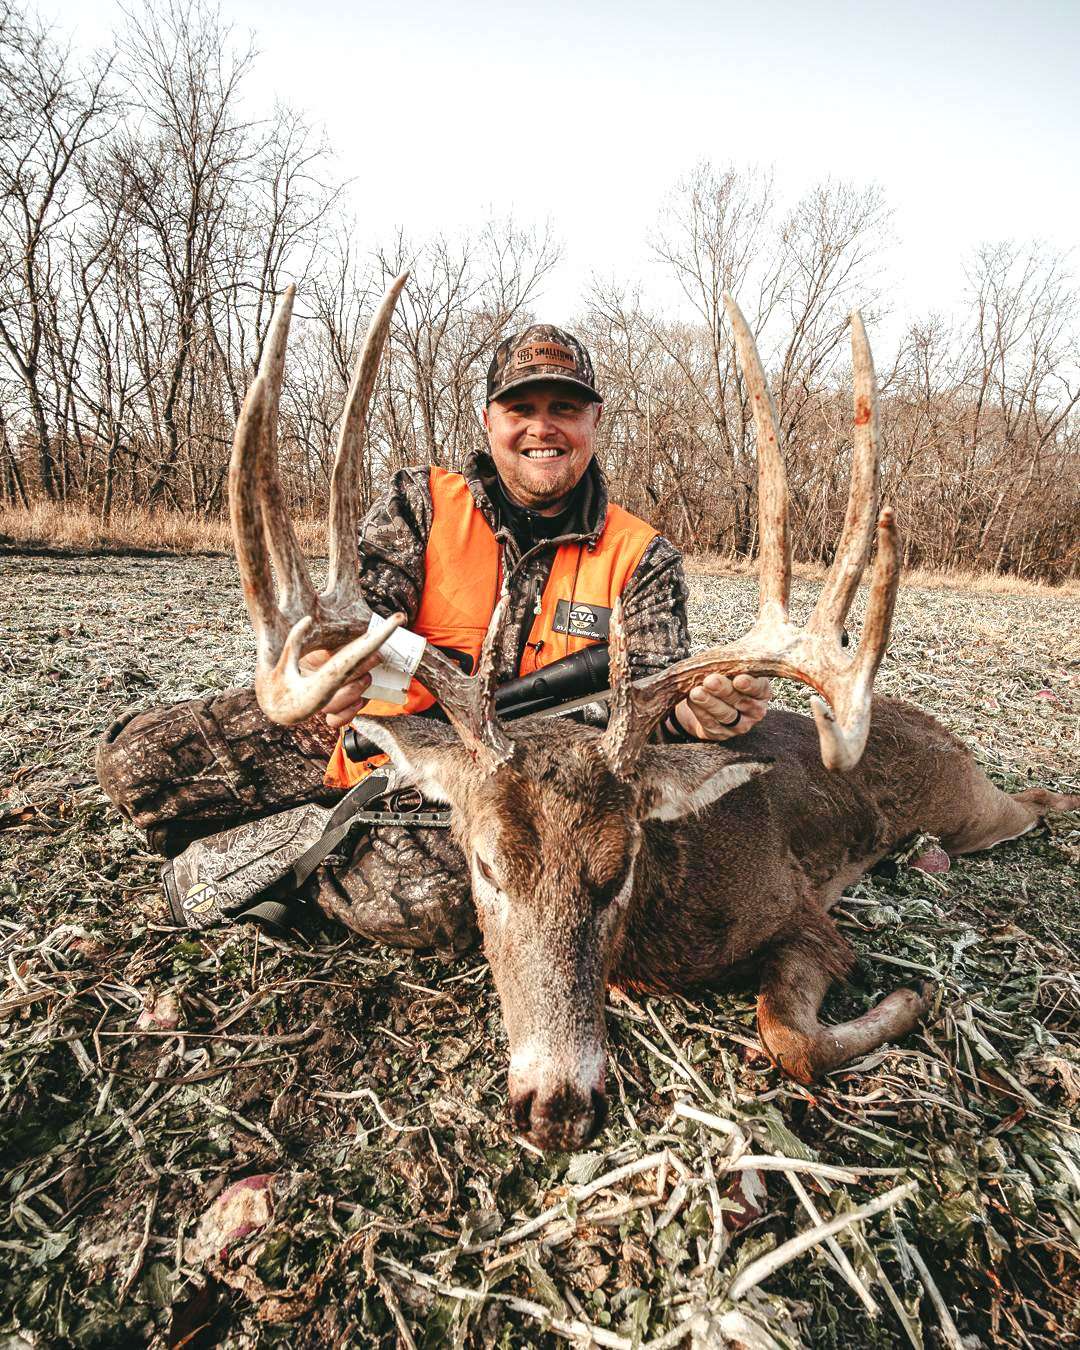 After recovering the buck, Kelley realized it was much bigger than he expected it to be. Image by Small Town Hunting